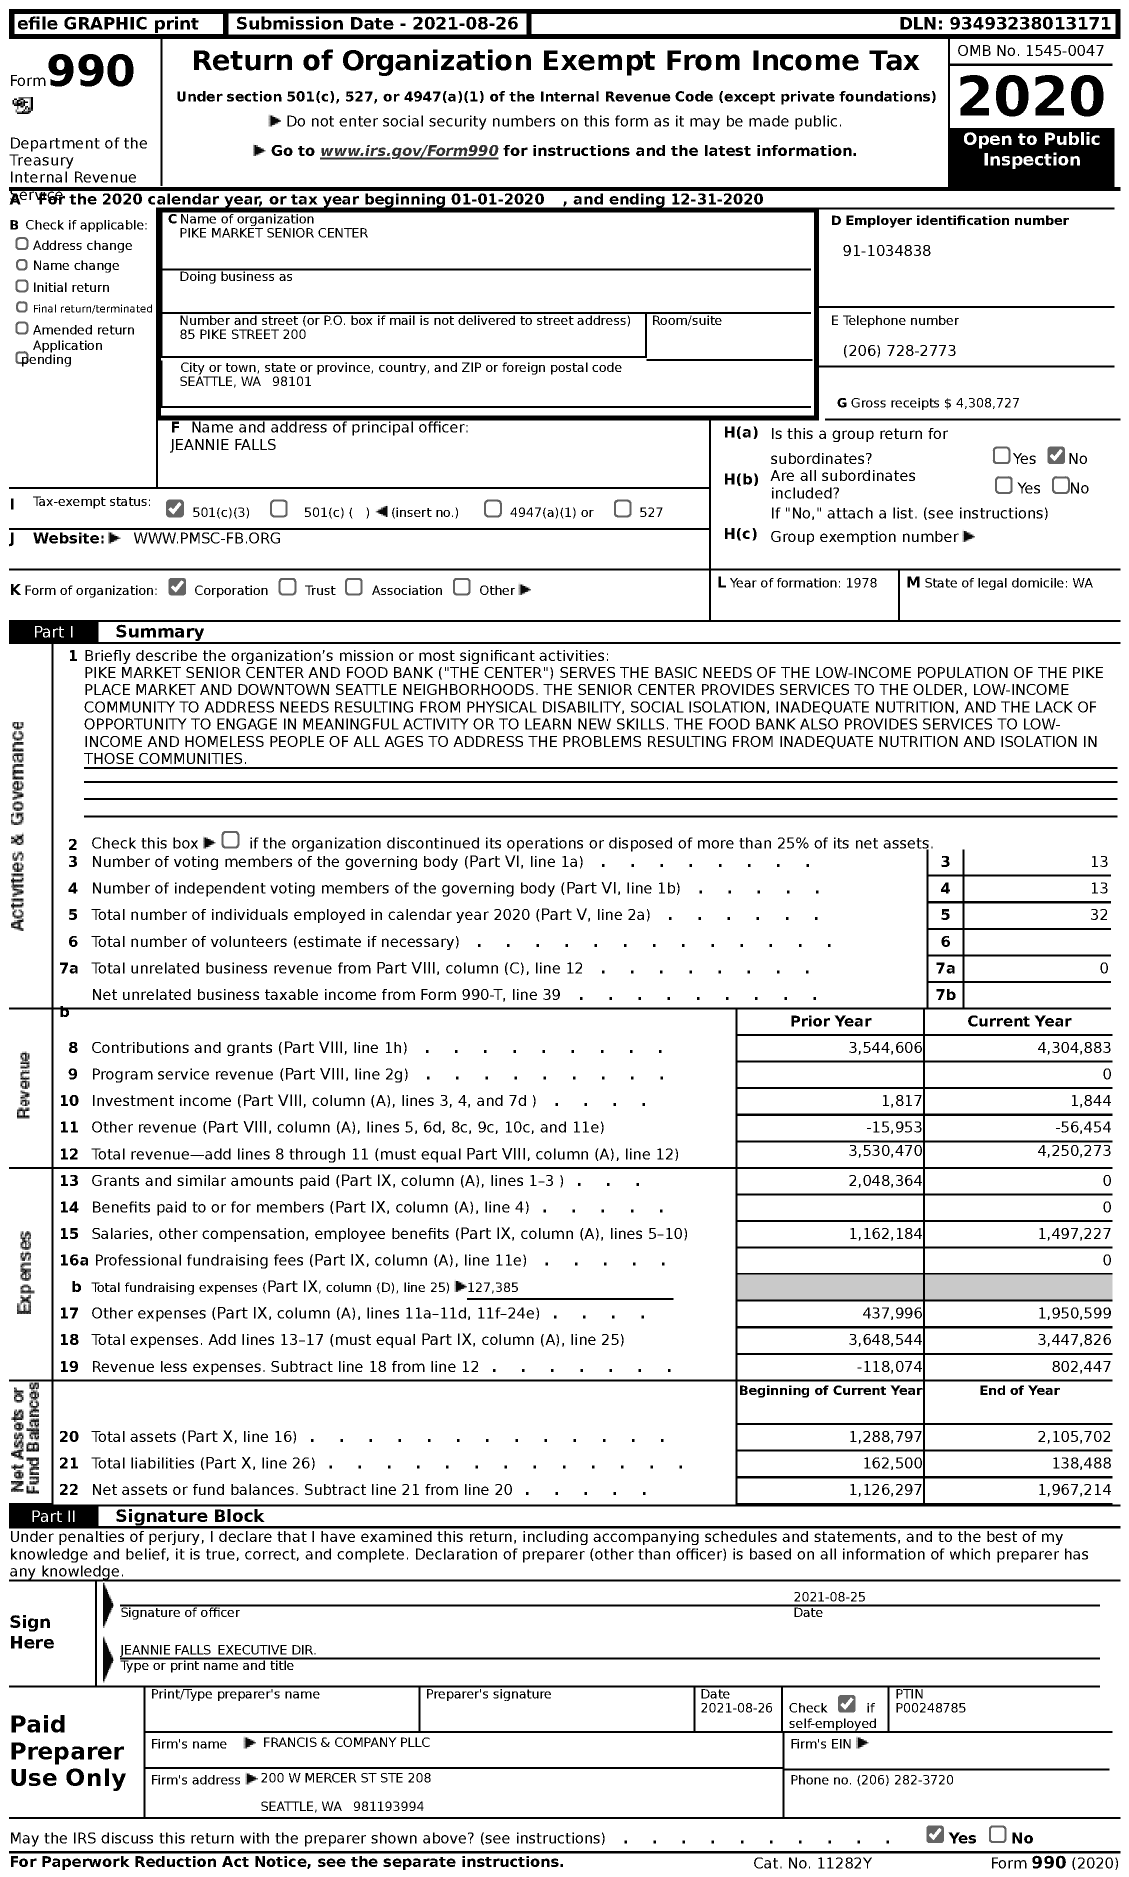 Image of first page of 2020 Form 990 for Pike Market Senior Center